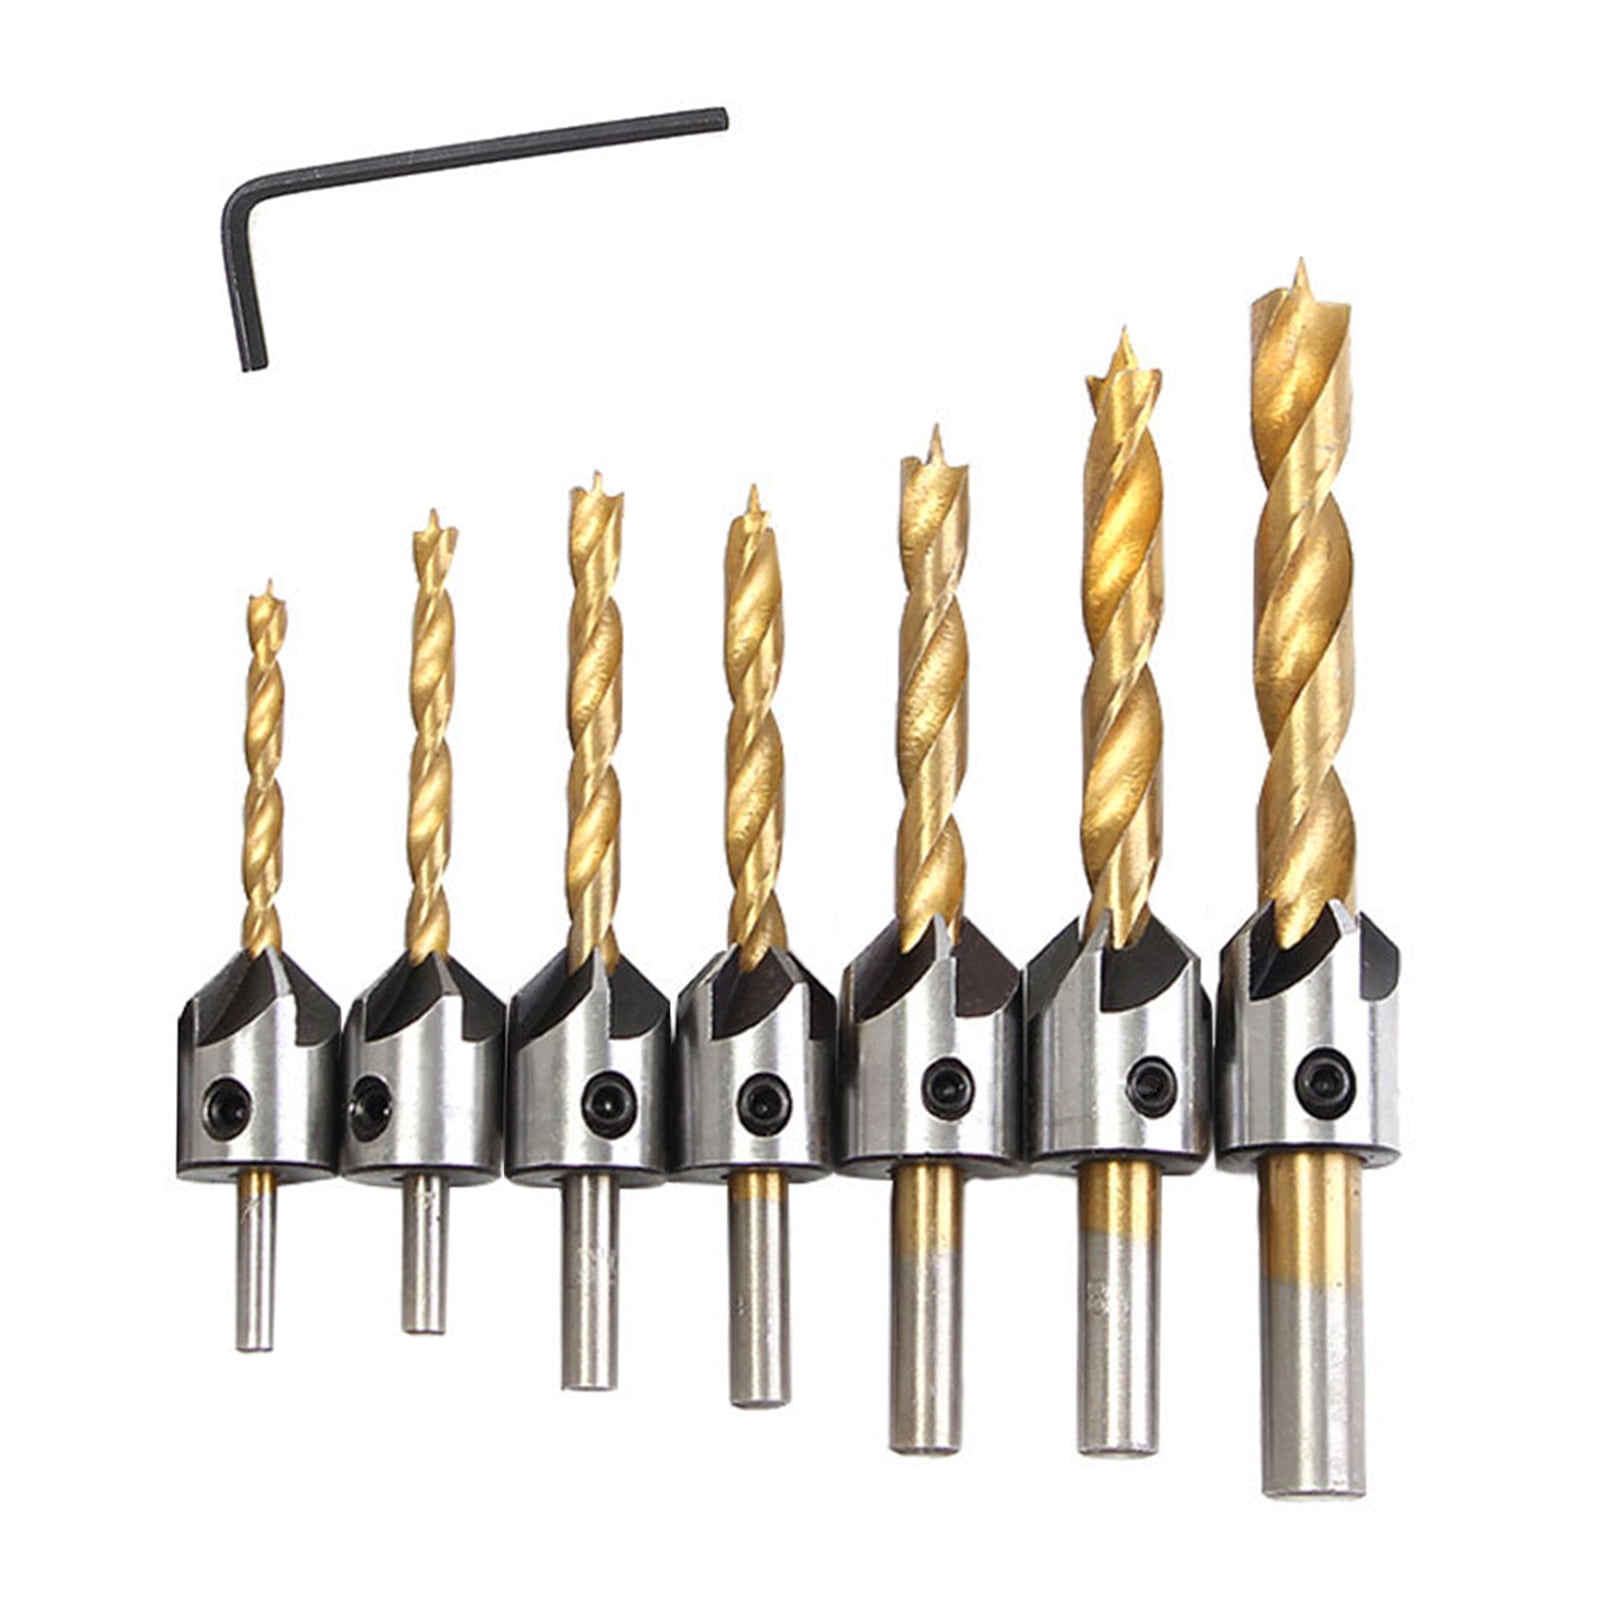 Countersink Drill Bits Set Woodworking Reamer Chamfer Tool 3-10mm Pre-Drill Counterbore Drill Bits Made for Screw